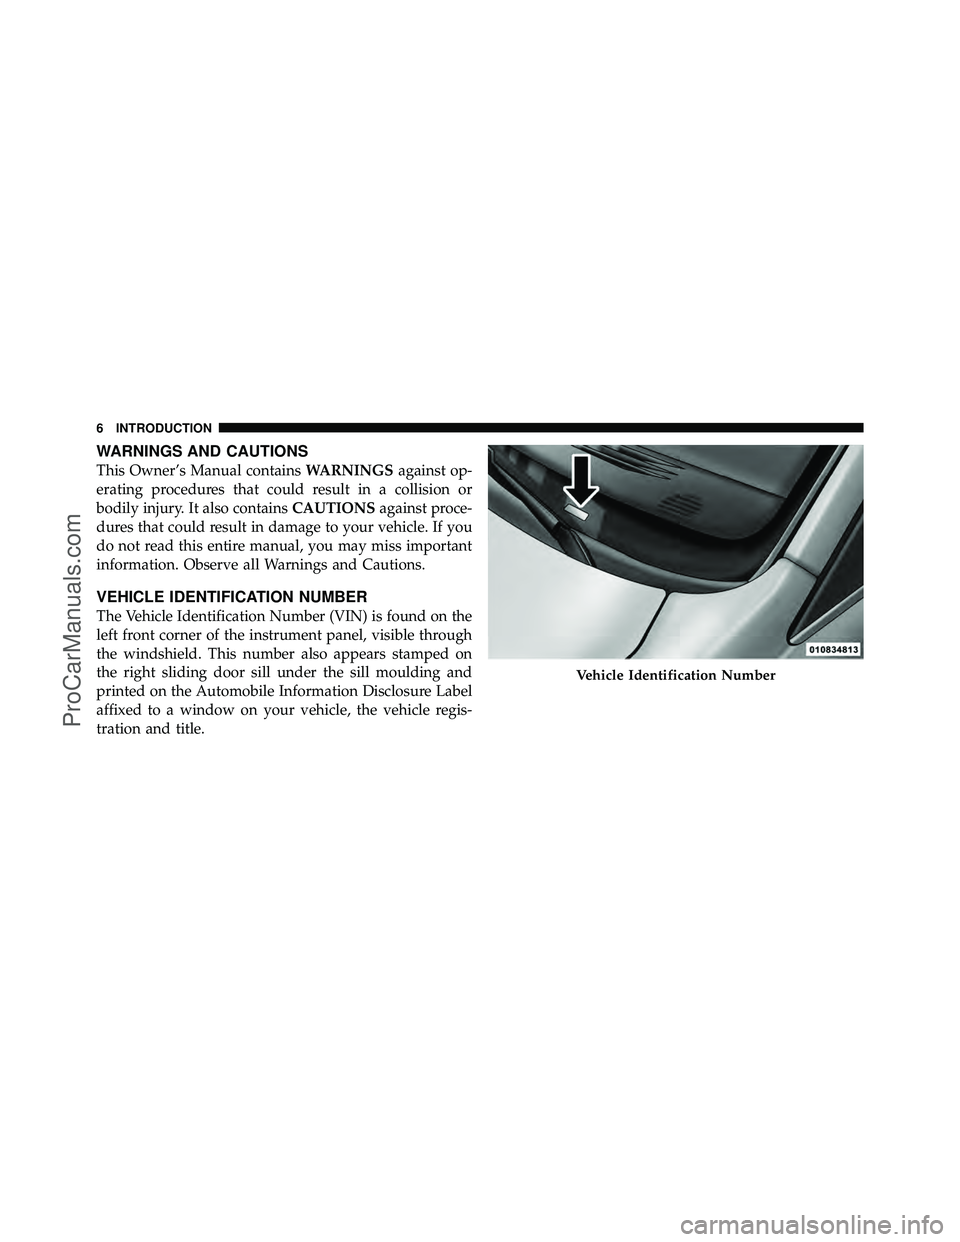 DODGE CARAVAN 2011  Owners Manual WARNINGS AND CAUTIONS
This Owner’s Manual containsWARNINGSagainst op-
erating procedures that could result in a collision or
bodily injury. It also contains CAUTIONSagainst proce-
dures that could r